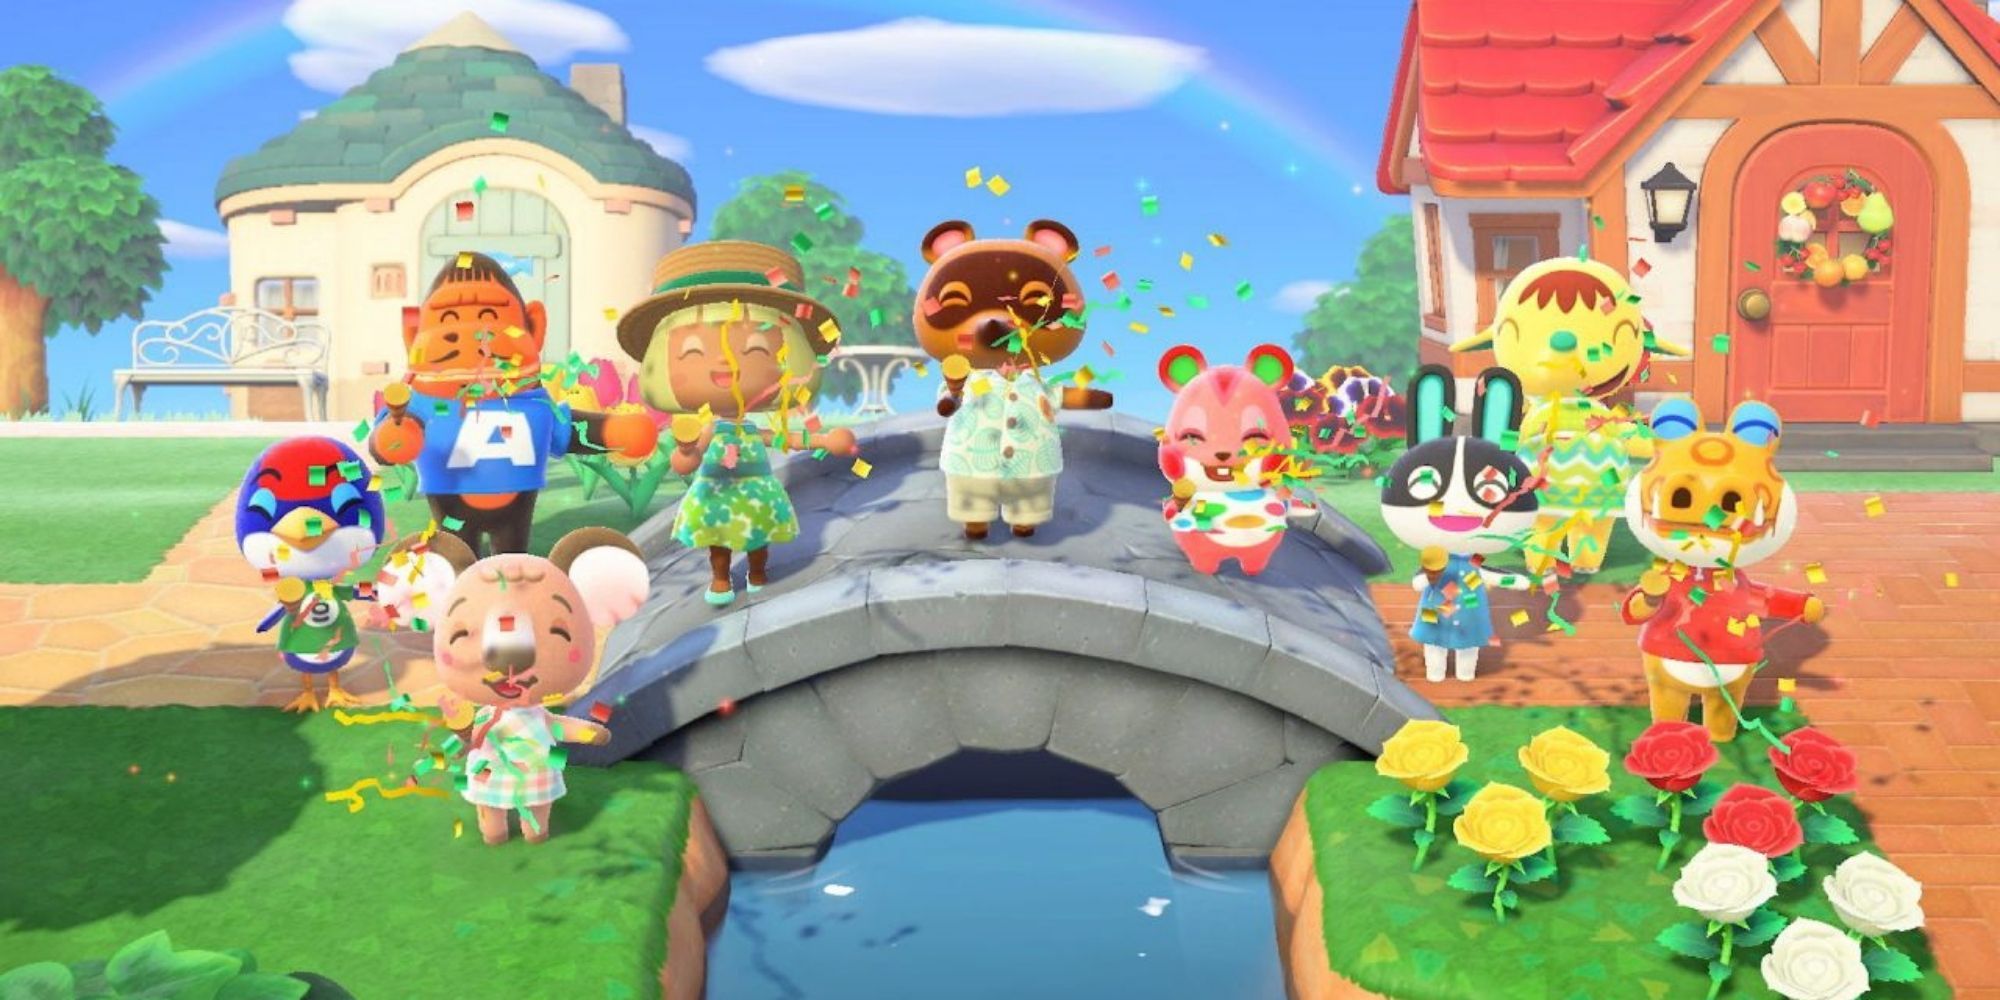 Tom Nook and other villagers pop confetti on a bridge